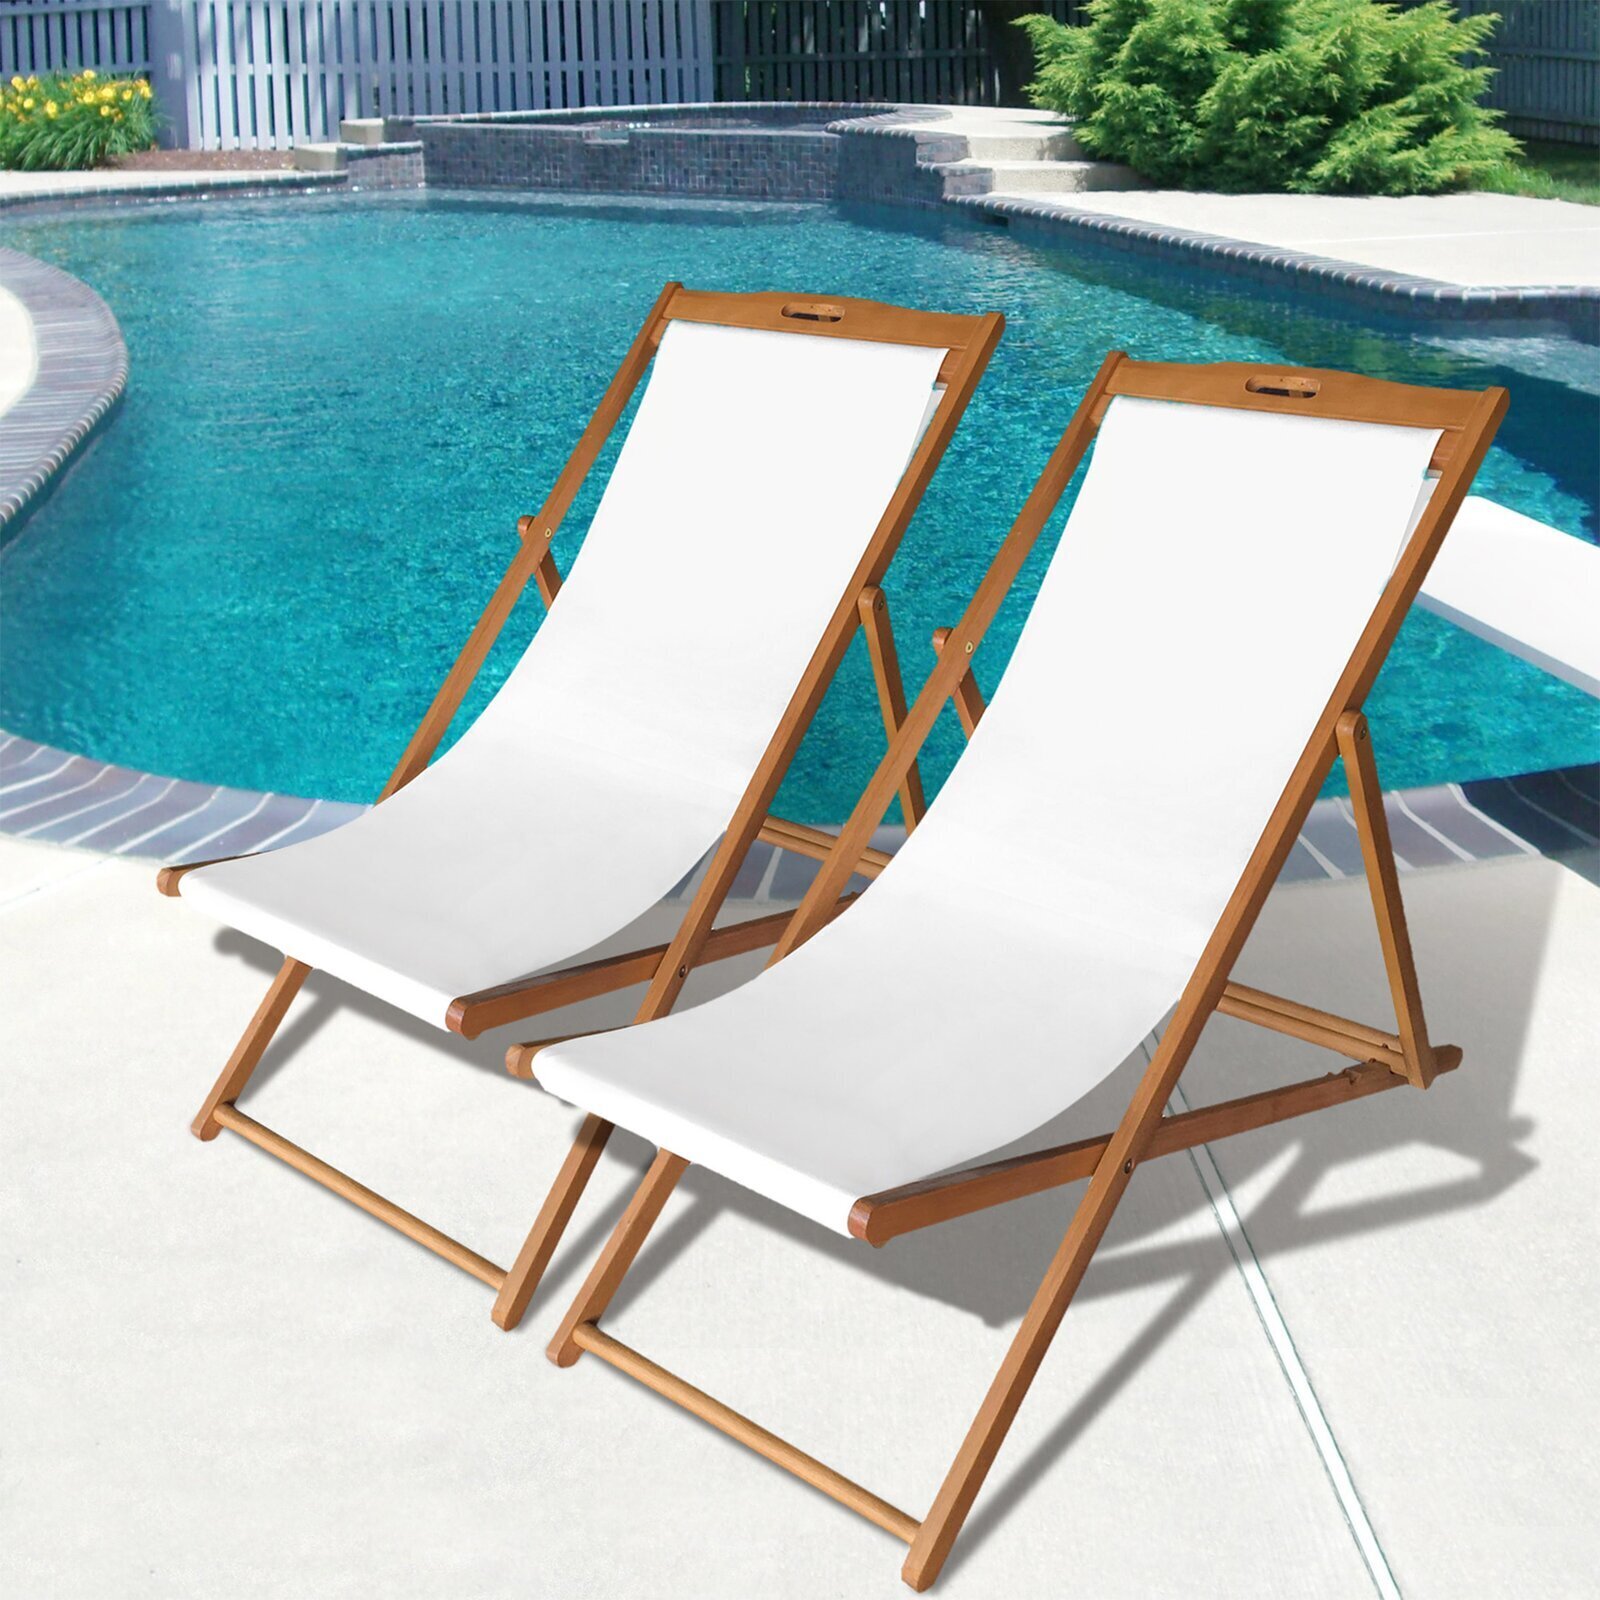 Folding Beach Chair Fabric and Wooden Frame Patio Swim Pool Reclining Chairs 